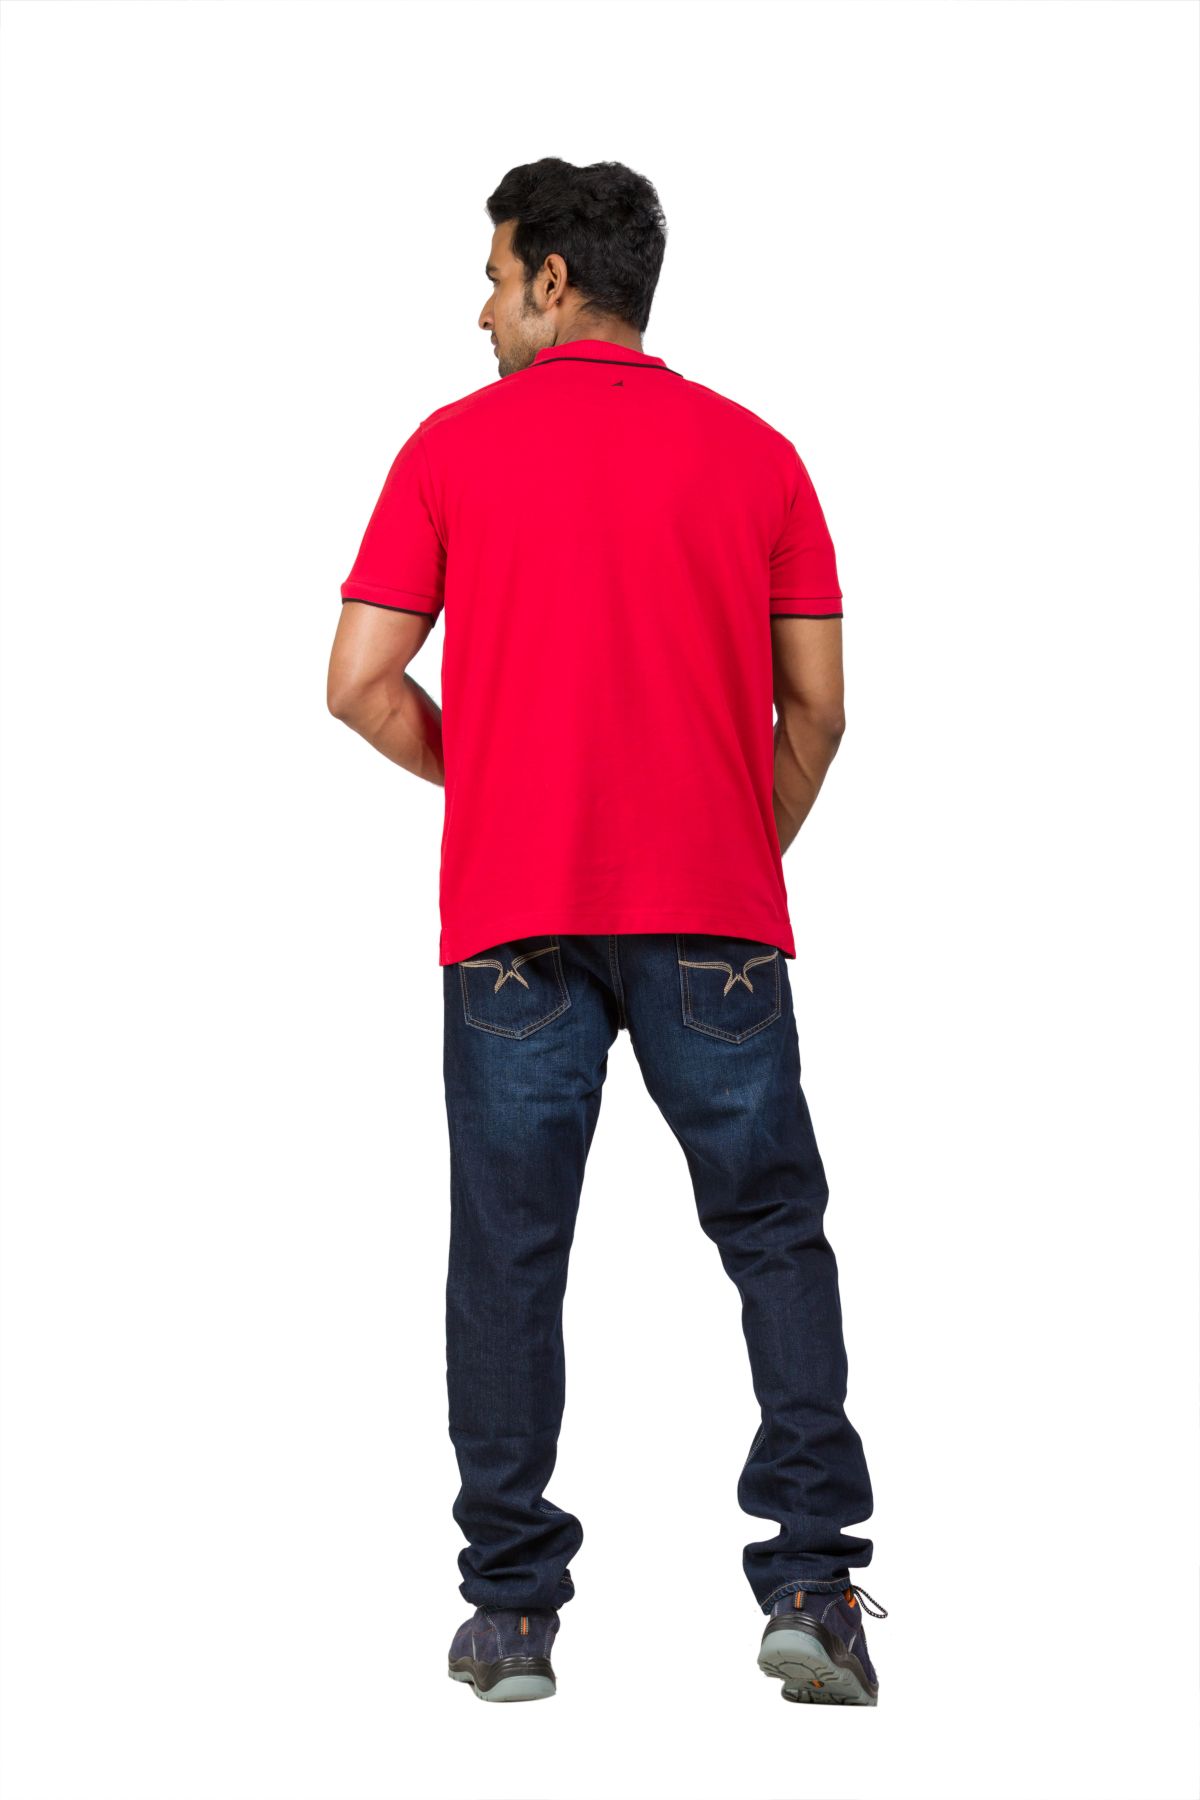 Cotton Blend Polo T-shirt Red-Black For Men